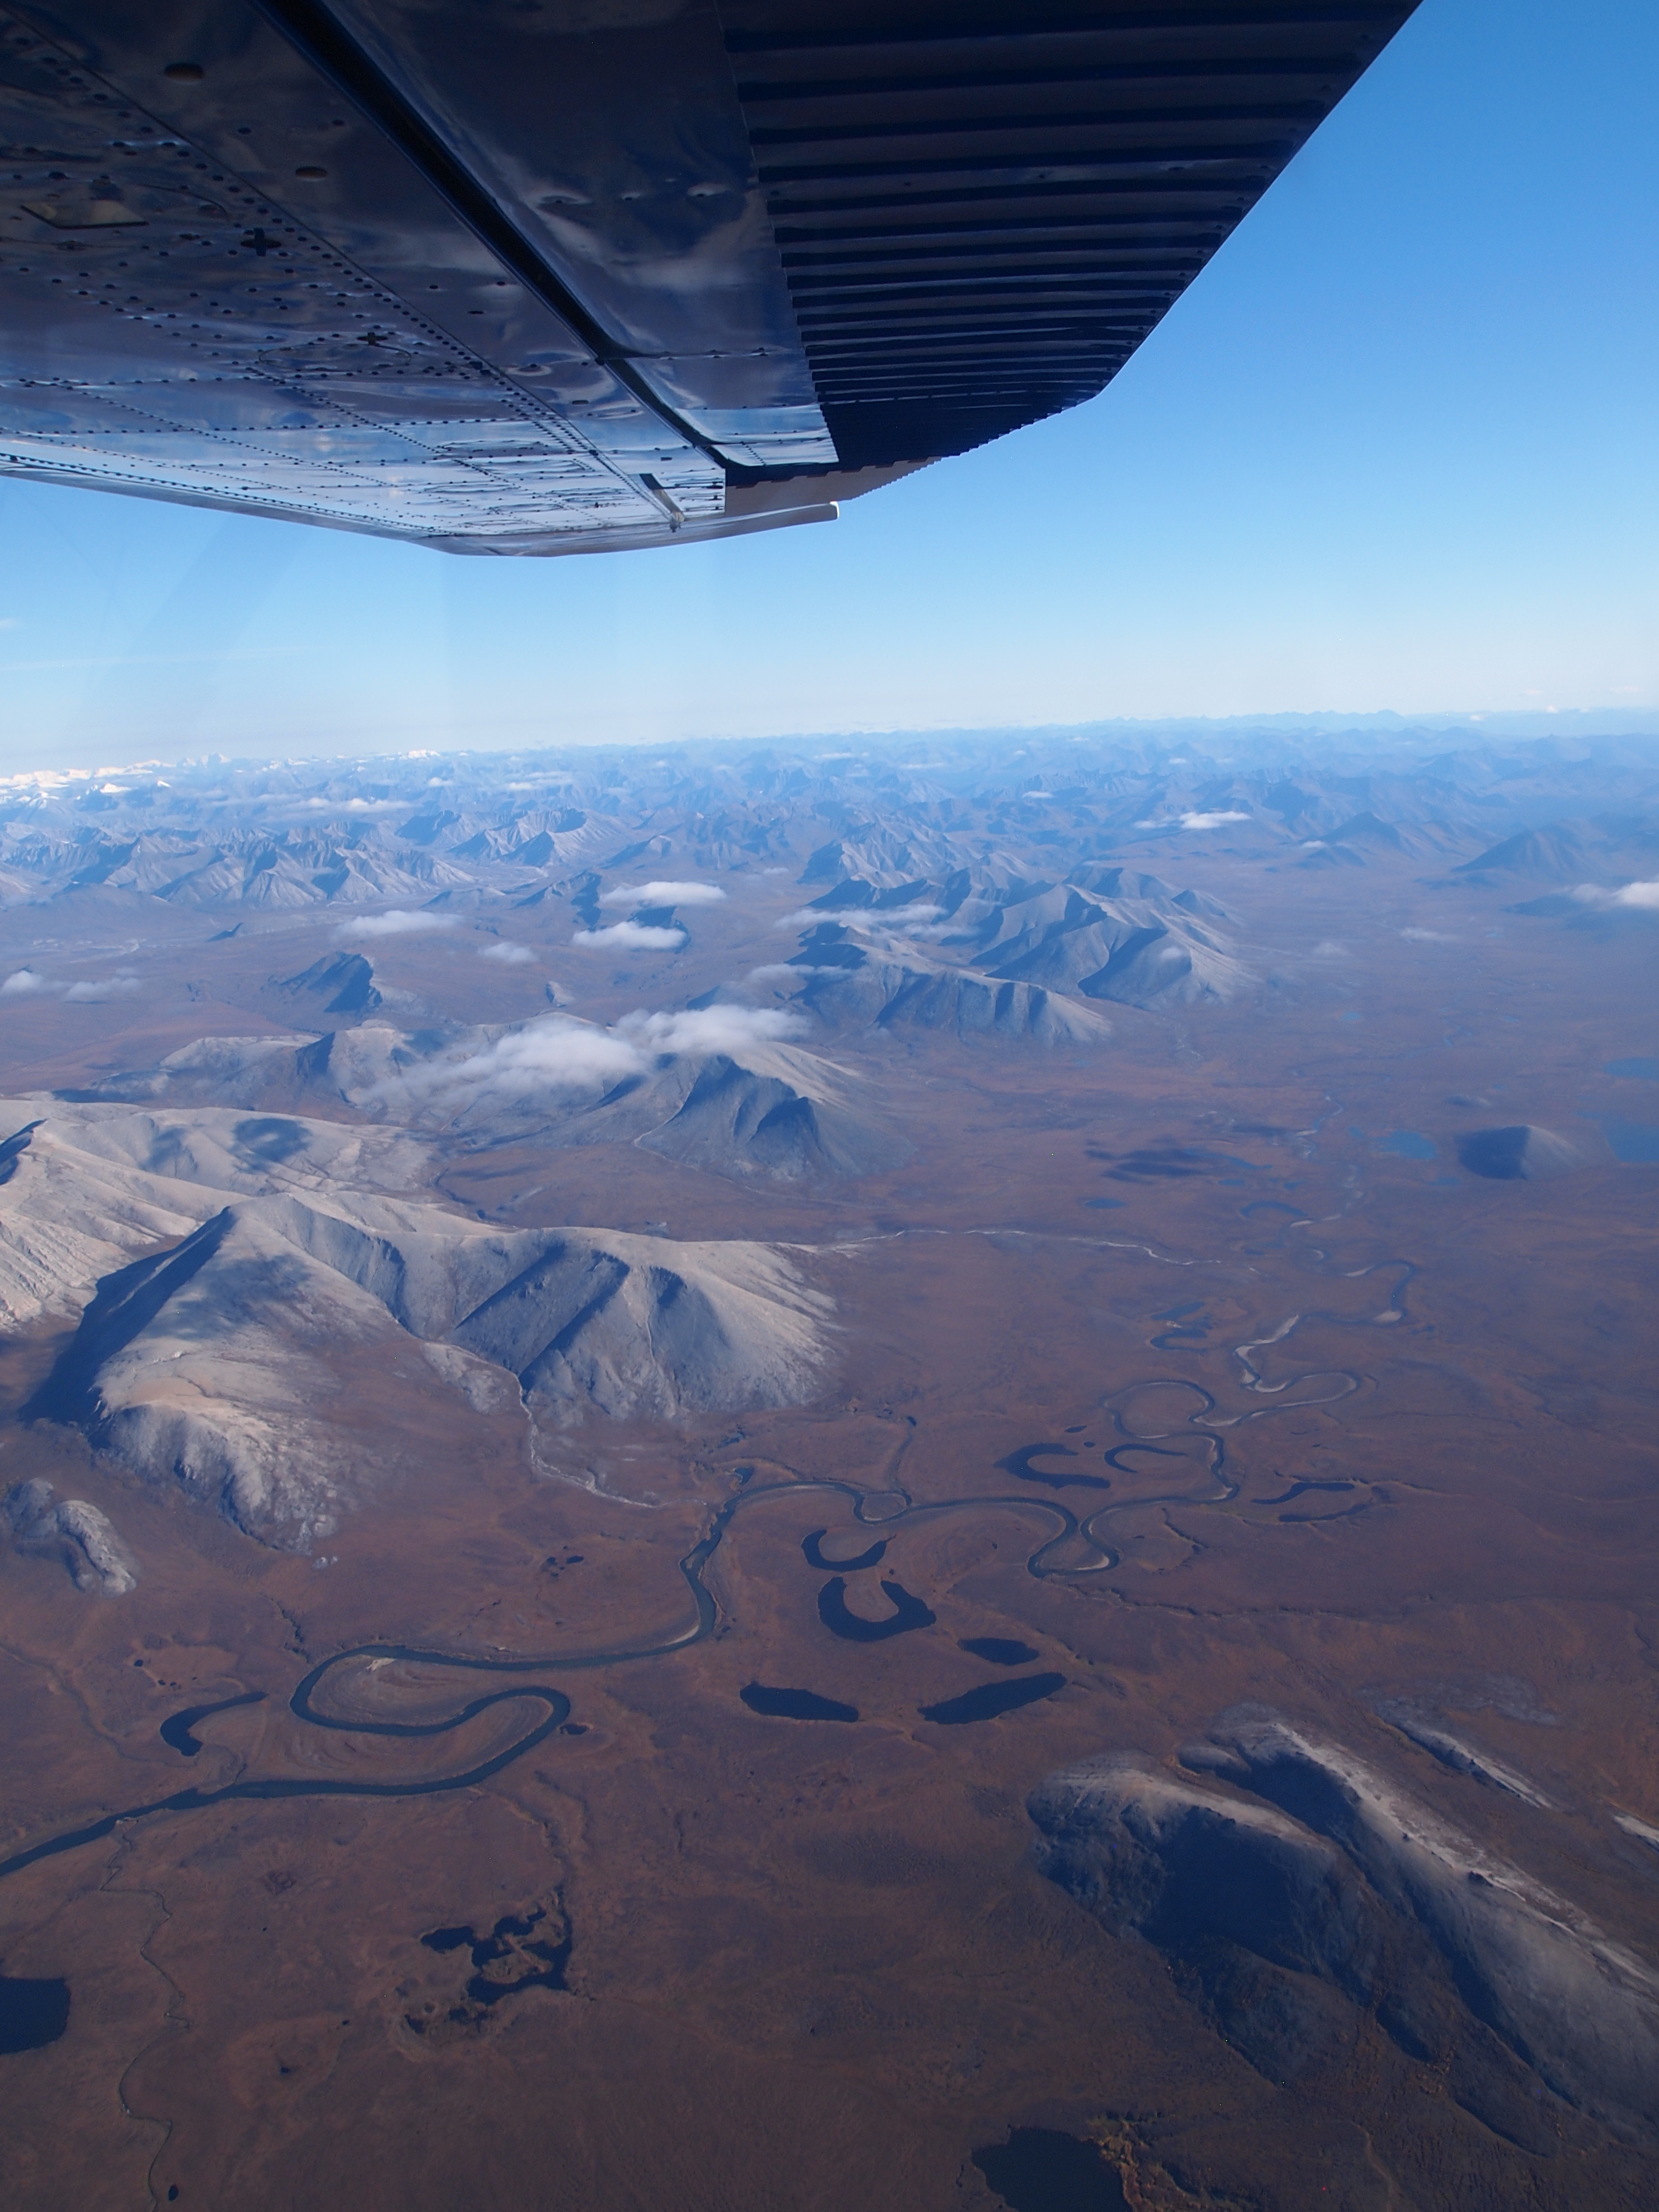 Mountains and tundra with river winding through it